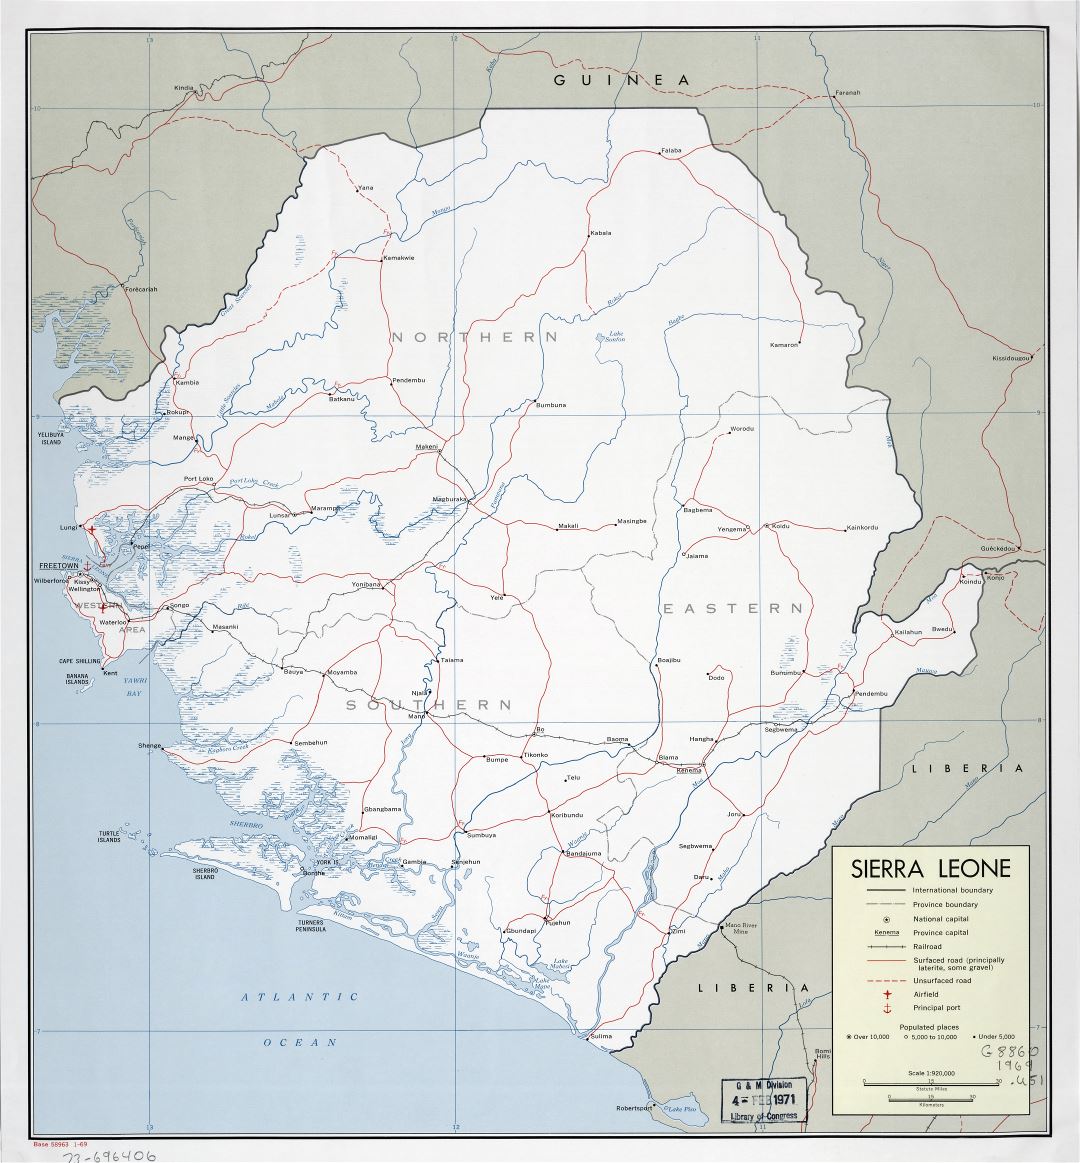 Large scale detailed political and administrative map of Sierra Leone with roads, railroads, cities, ports and airports - 1969